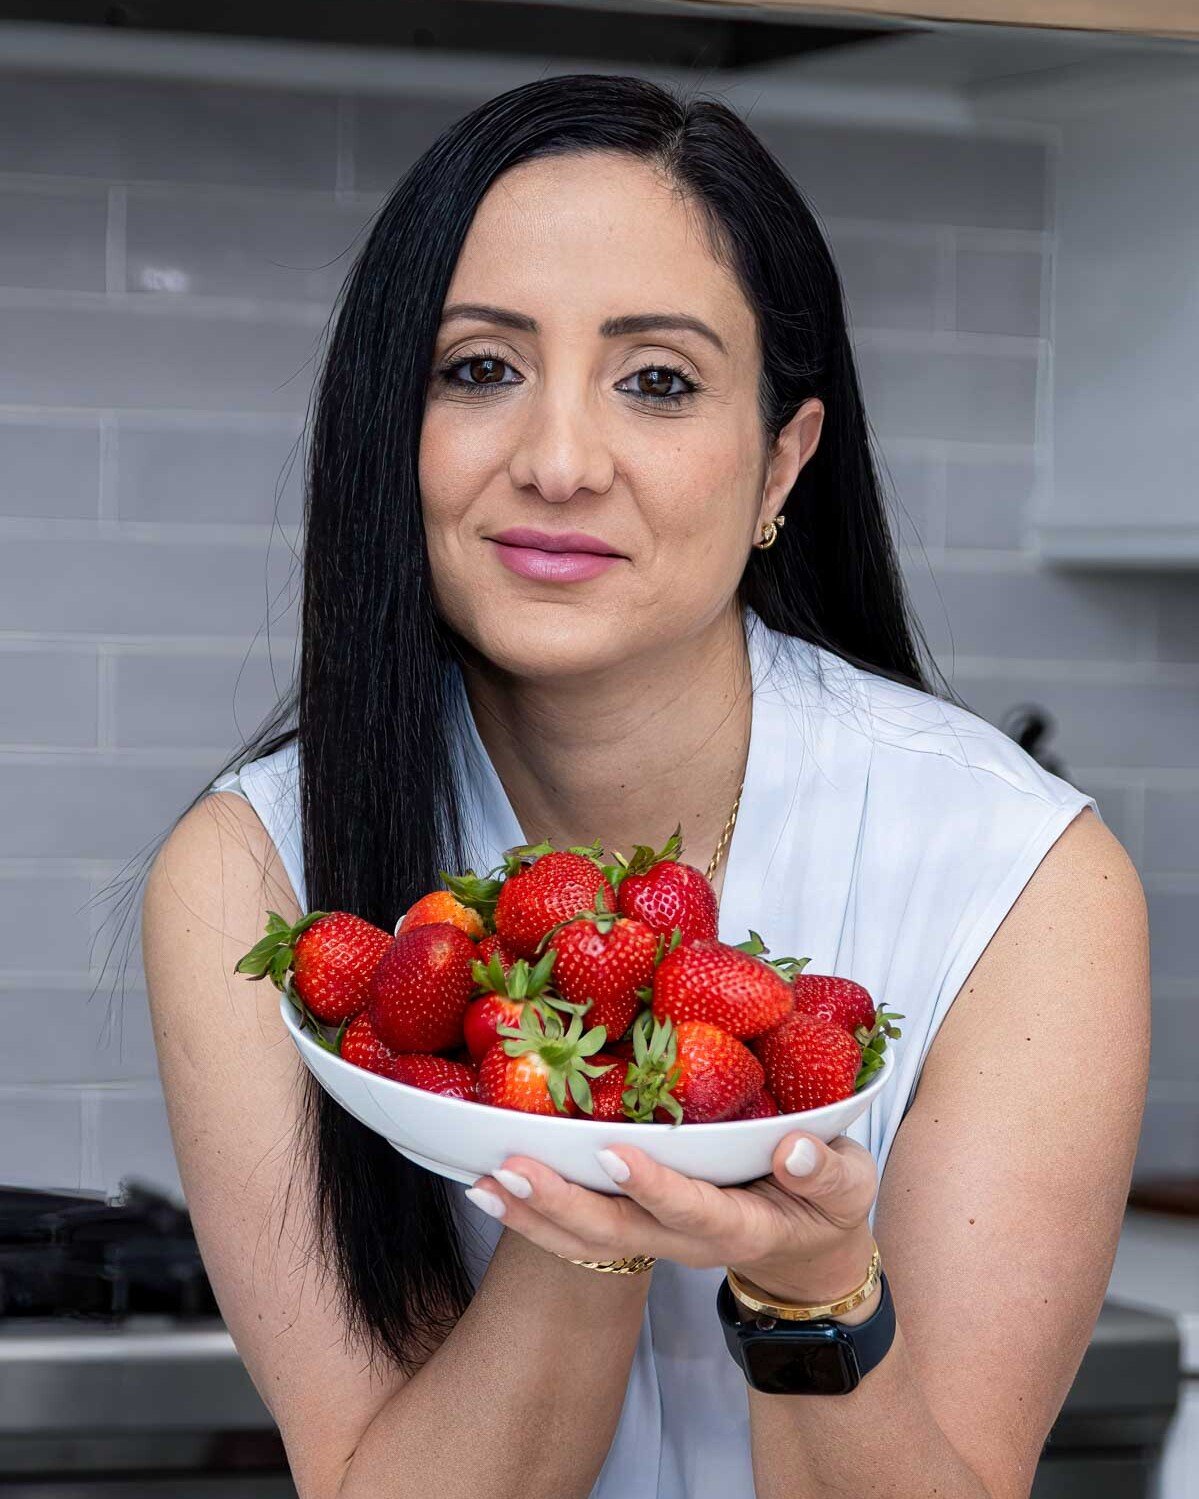 rena in a white shirt holding a bowl of strawberries